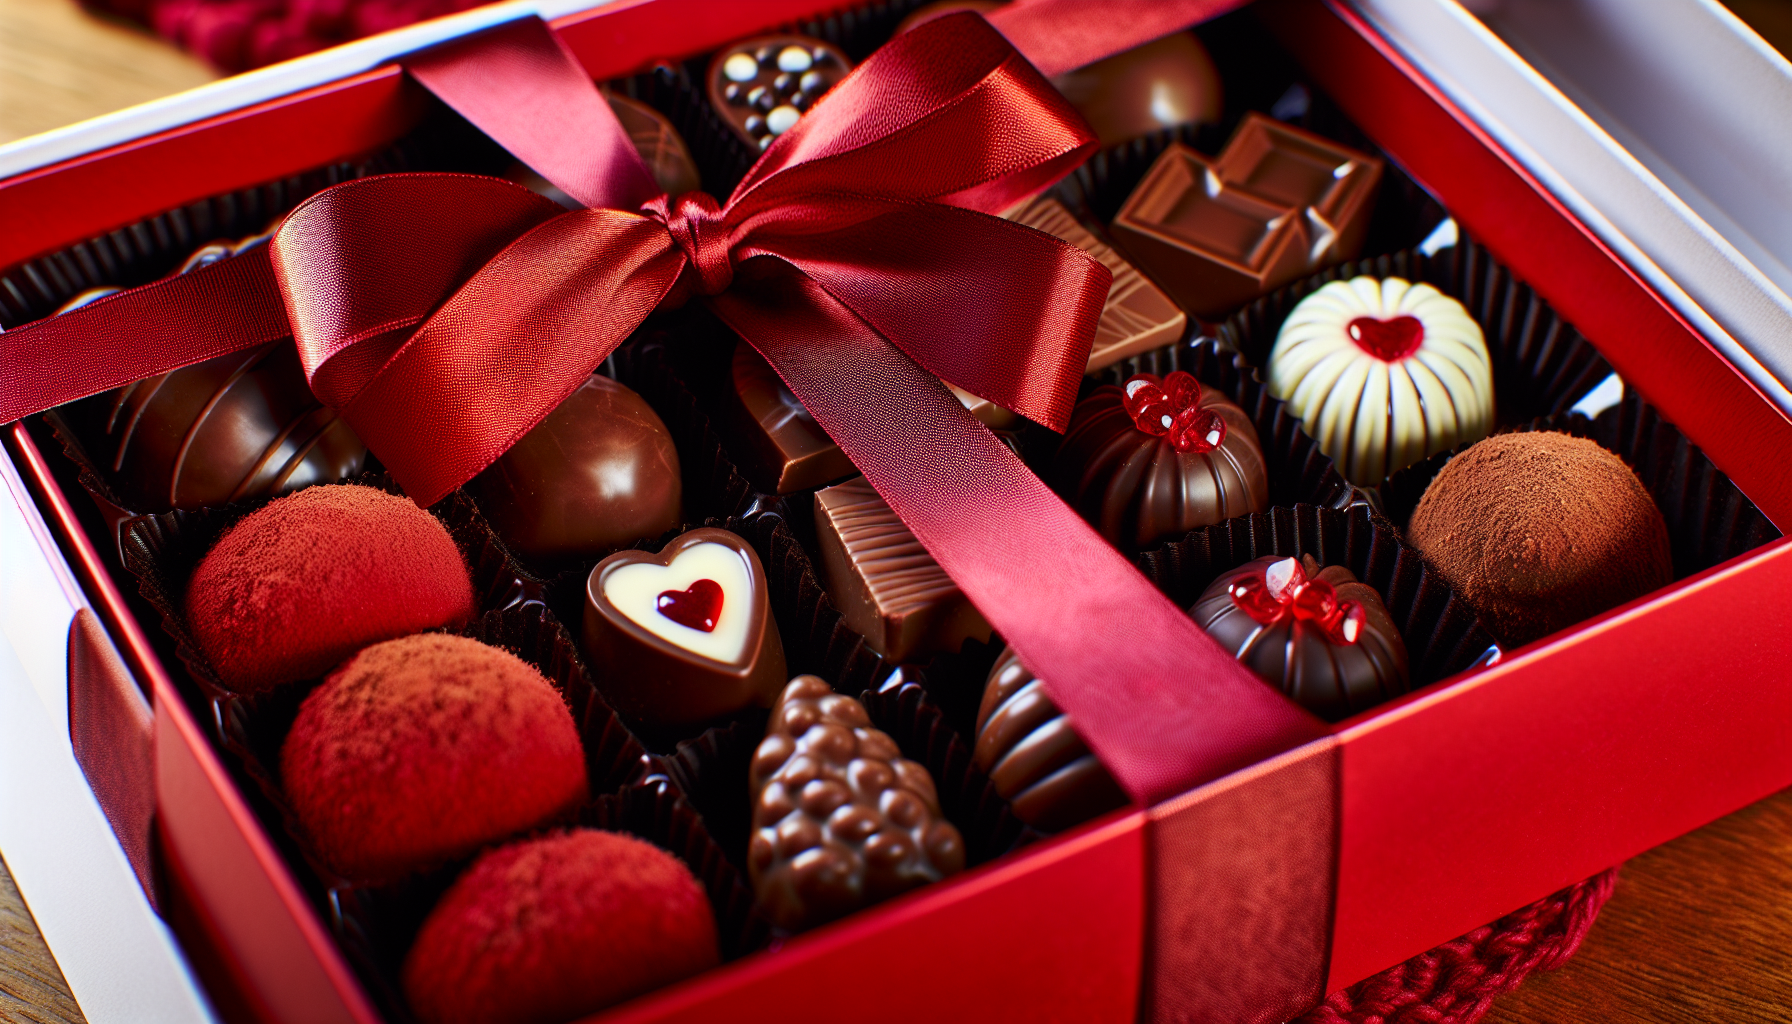 Assorted chocolates and confectionery for Valentine's Day